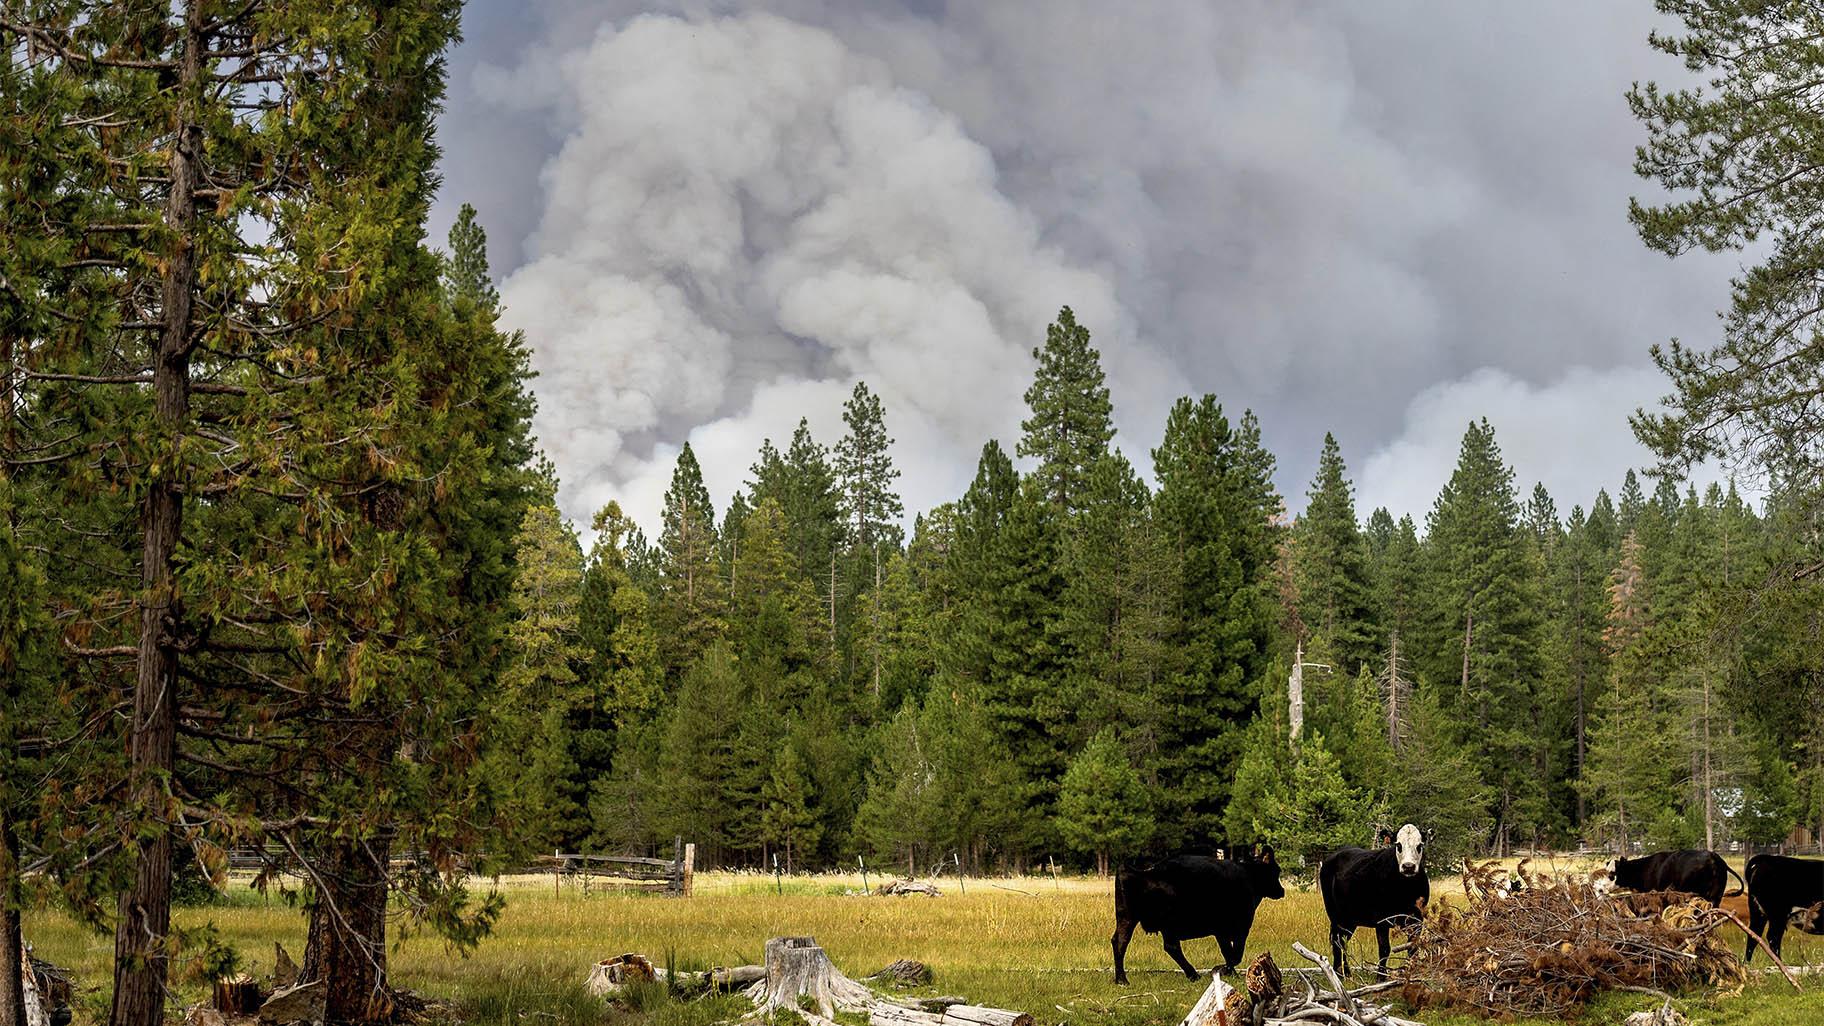 FILE - In this Monday, July 26, 2021, file photo, cows graze as smoke rises from the Dixie Fire burning in Lassen National Forest, near Jonesville, Calif. (AP Photo / Noah Berger, File)